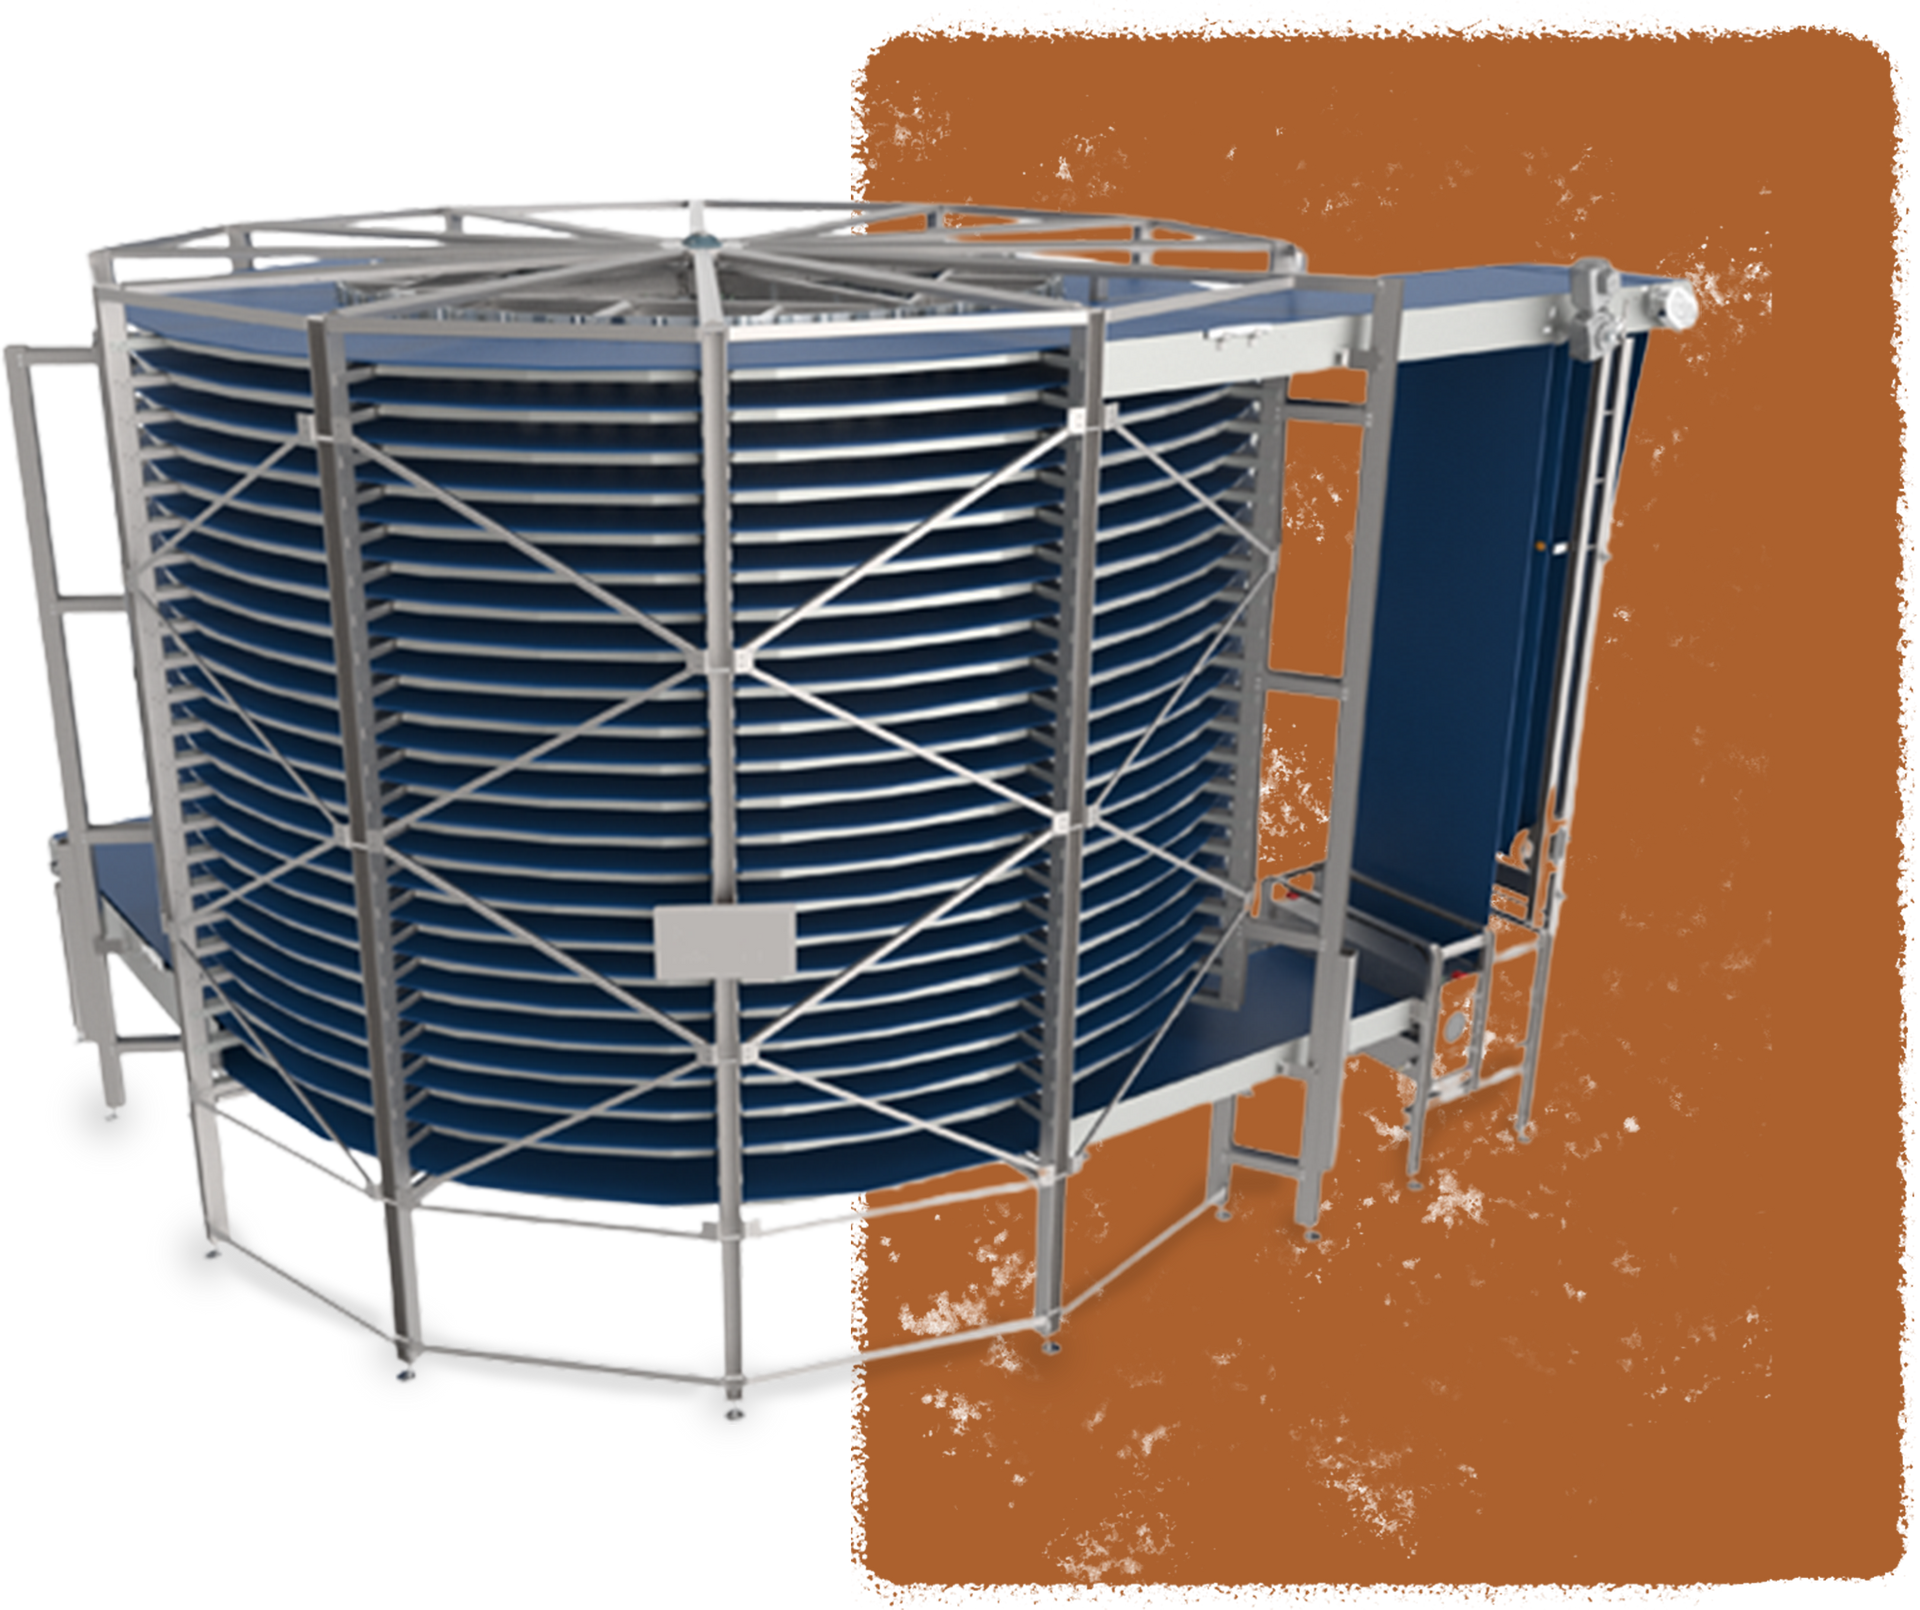 Spiral Cooling Tower with brown textured background